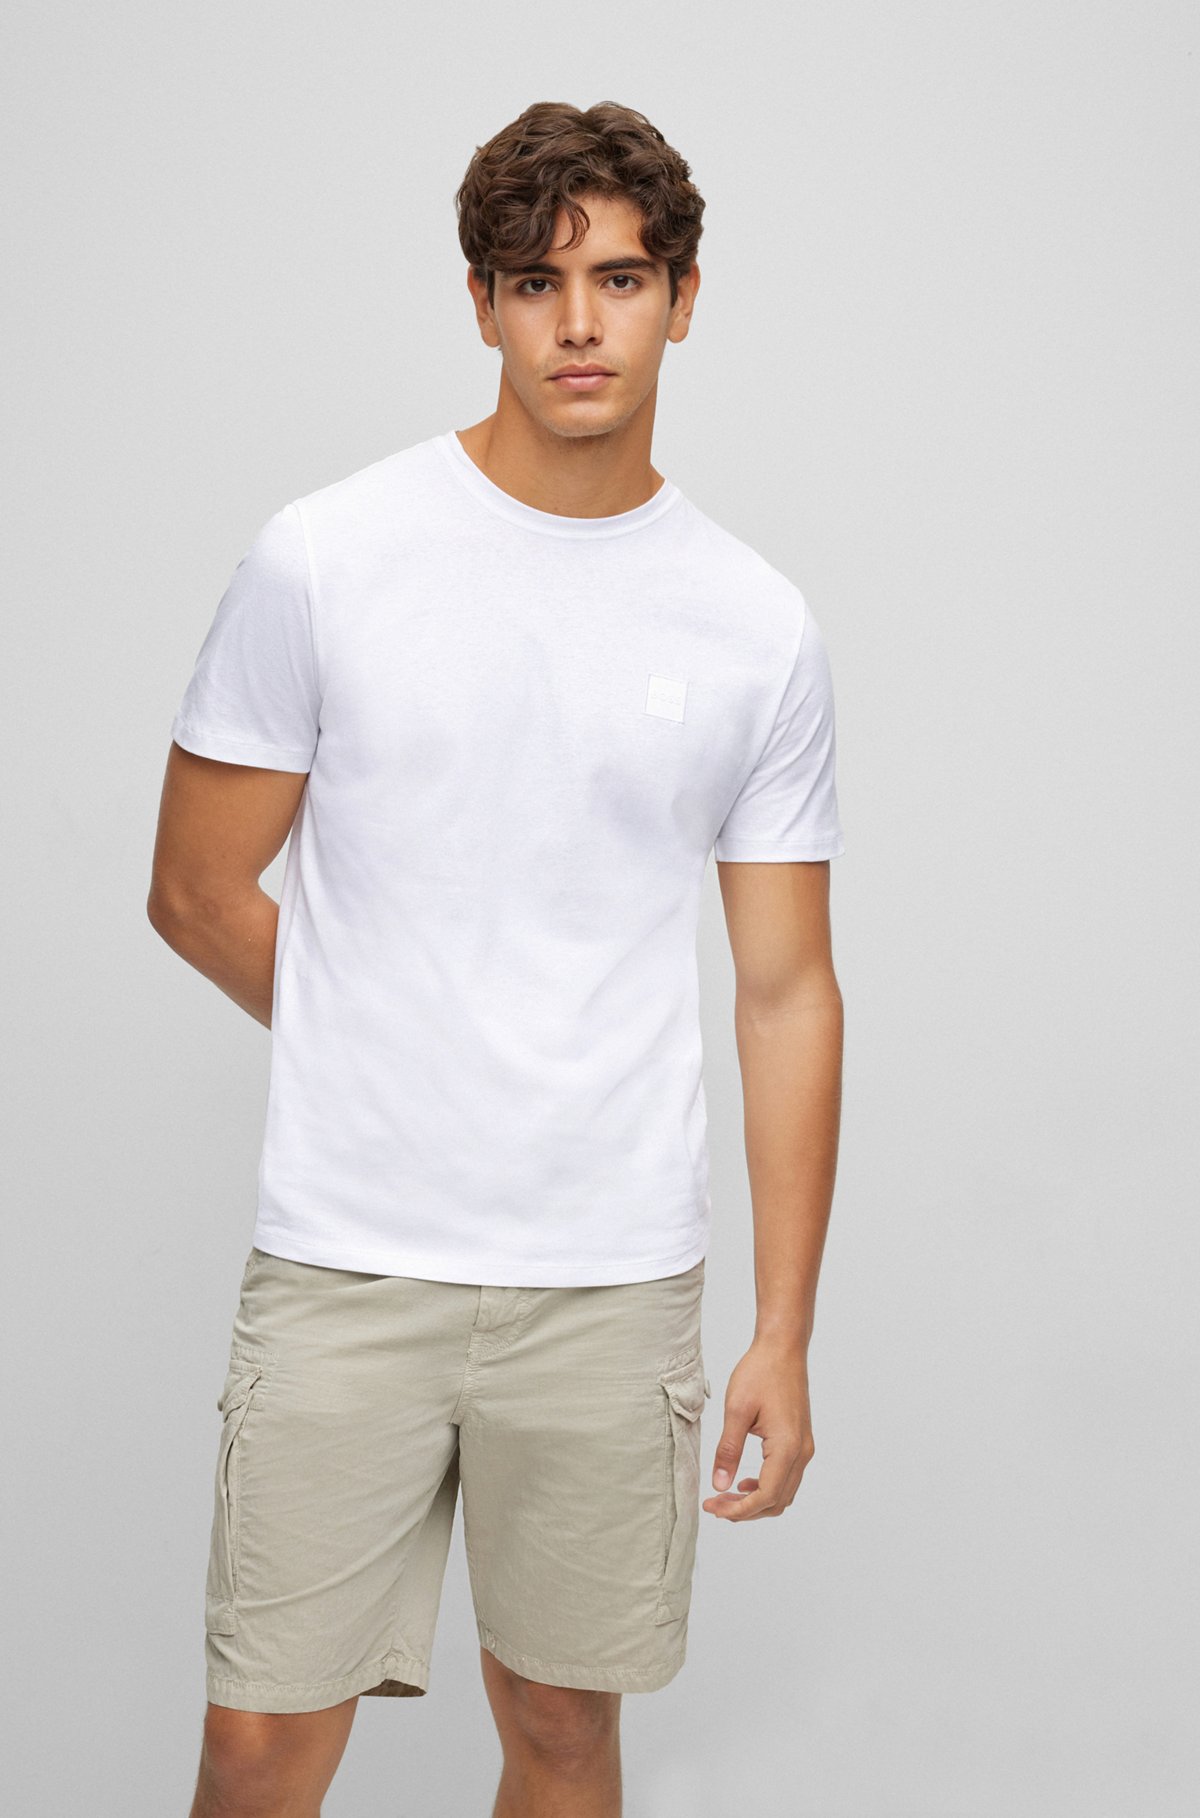 T-shirt relaxed fit in jersey di cotone con toppa con logo, Bianco